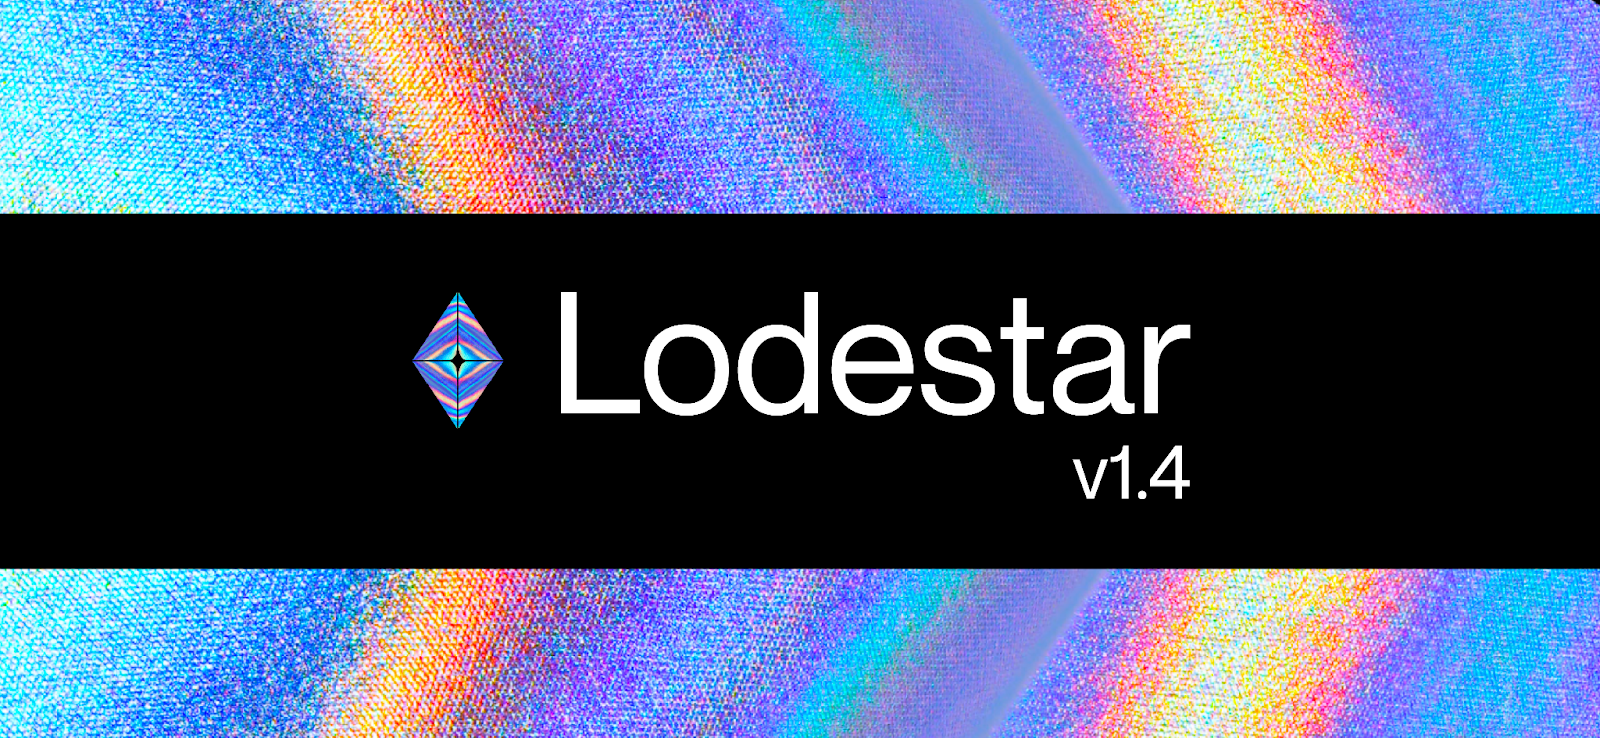 Lodestar v1.4.0: a Fully Production-Ready Ethereum Consensus Client